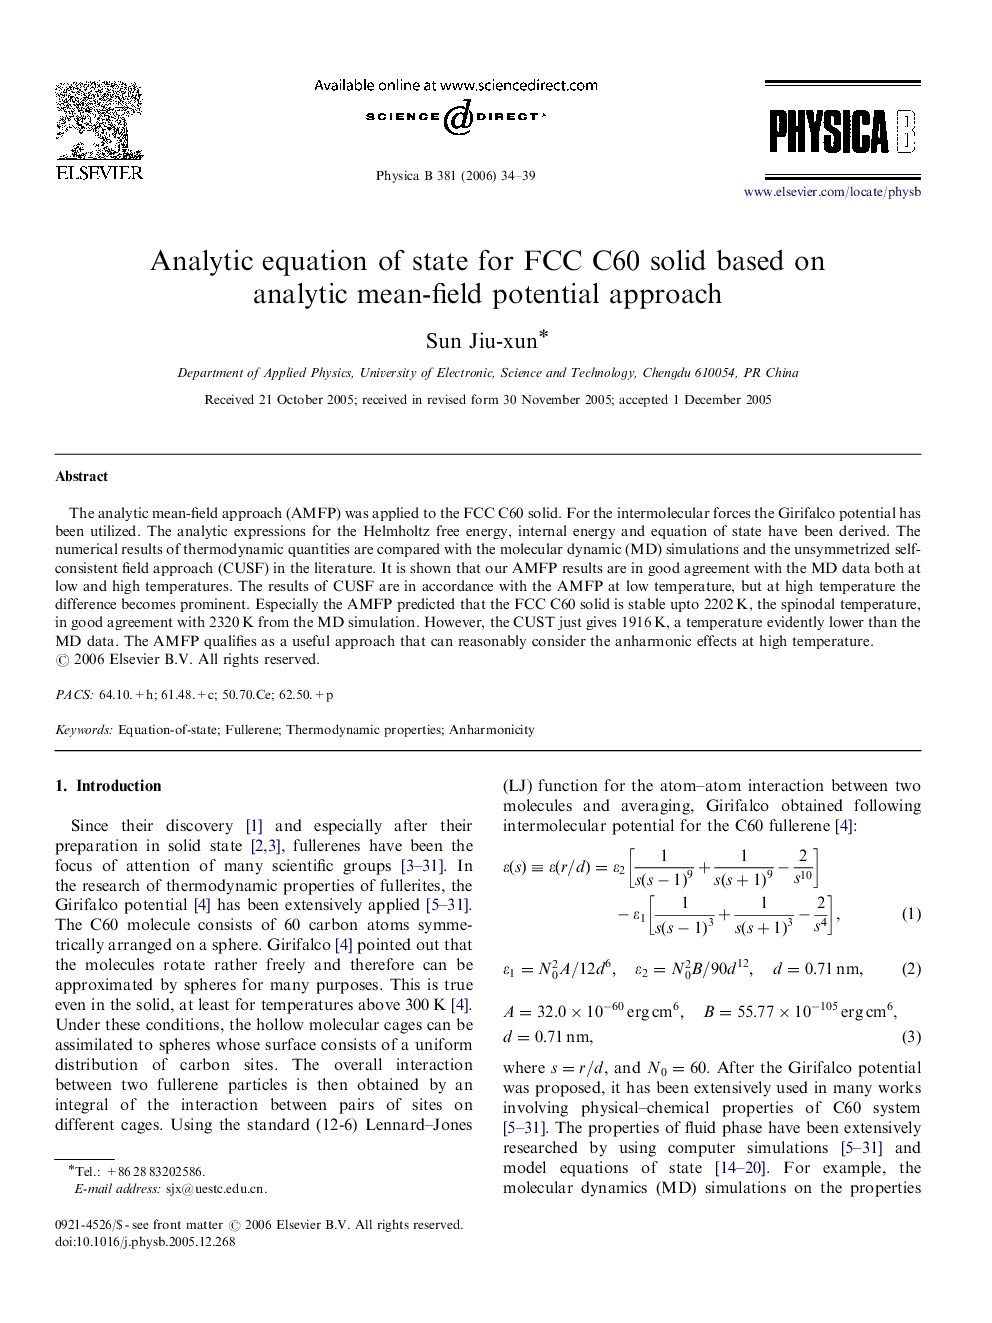 Analytic equation of state for FCC C60 solid based on analytic mean-field potential approach